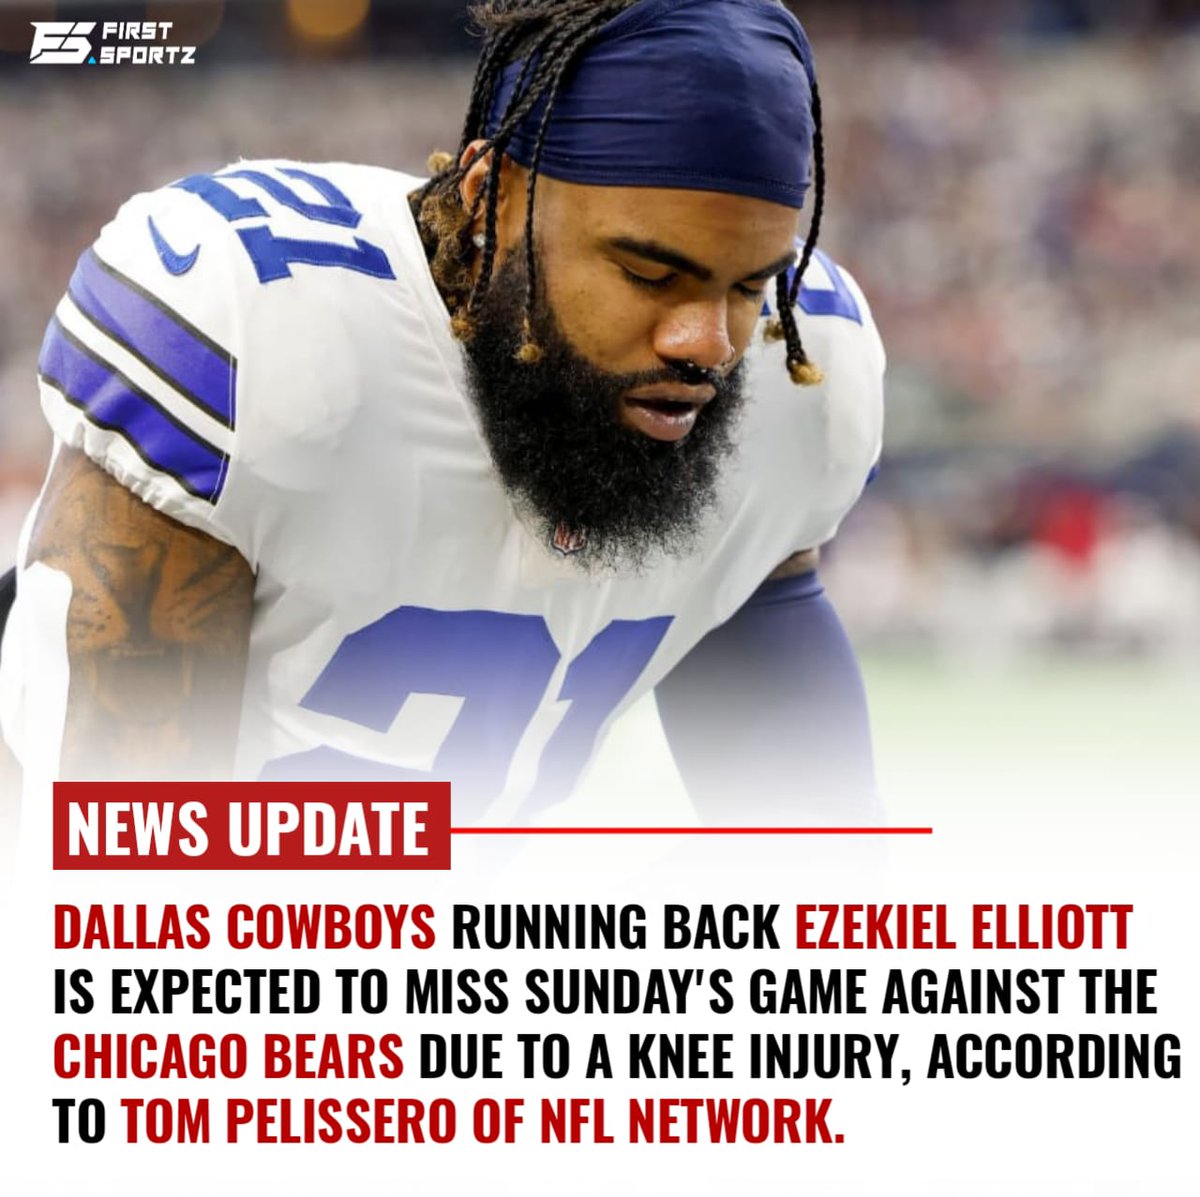 Cowboys running back Ezekiel Elliott is likely to miss the Week 8 game against the Bears after suffering a sprained MCL in his right knee and a thigh bruise in last week's win over the Lions. #CowboysNation #CowboysFootball #NFL #NFLTwitter #DallasCowboys #NFLRumors